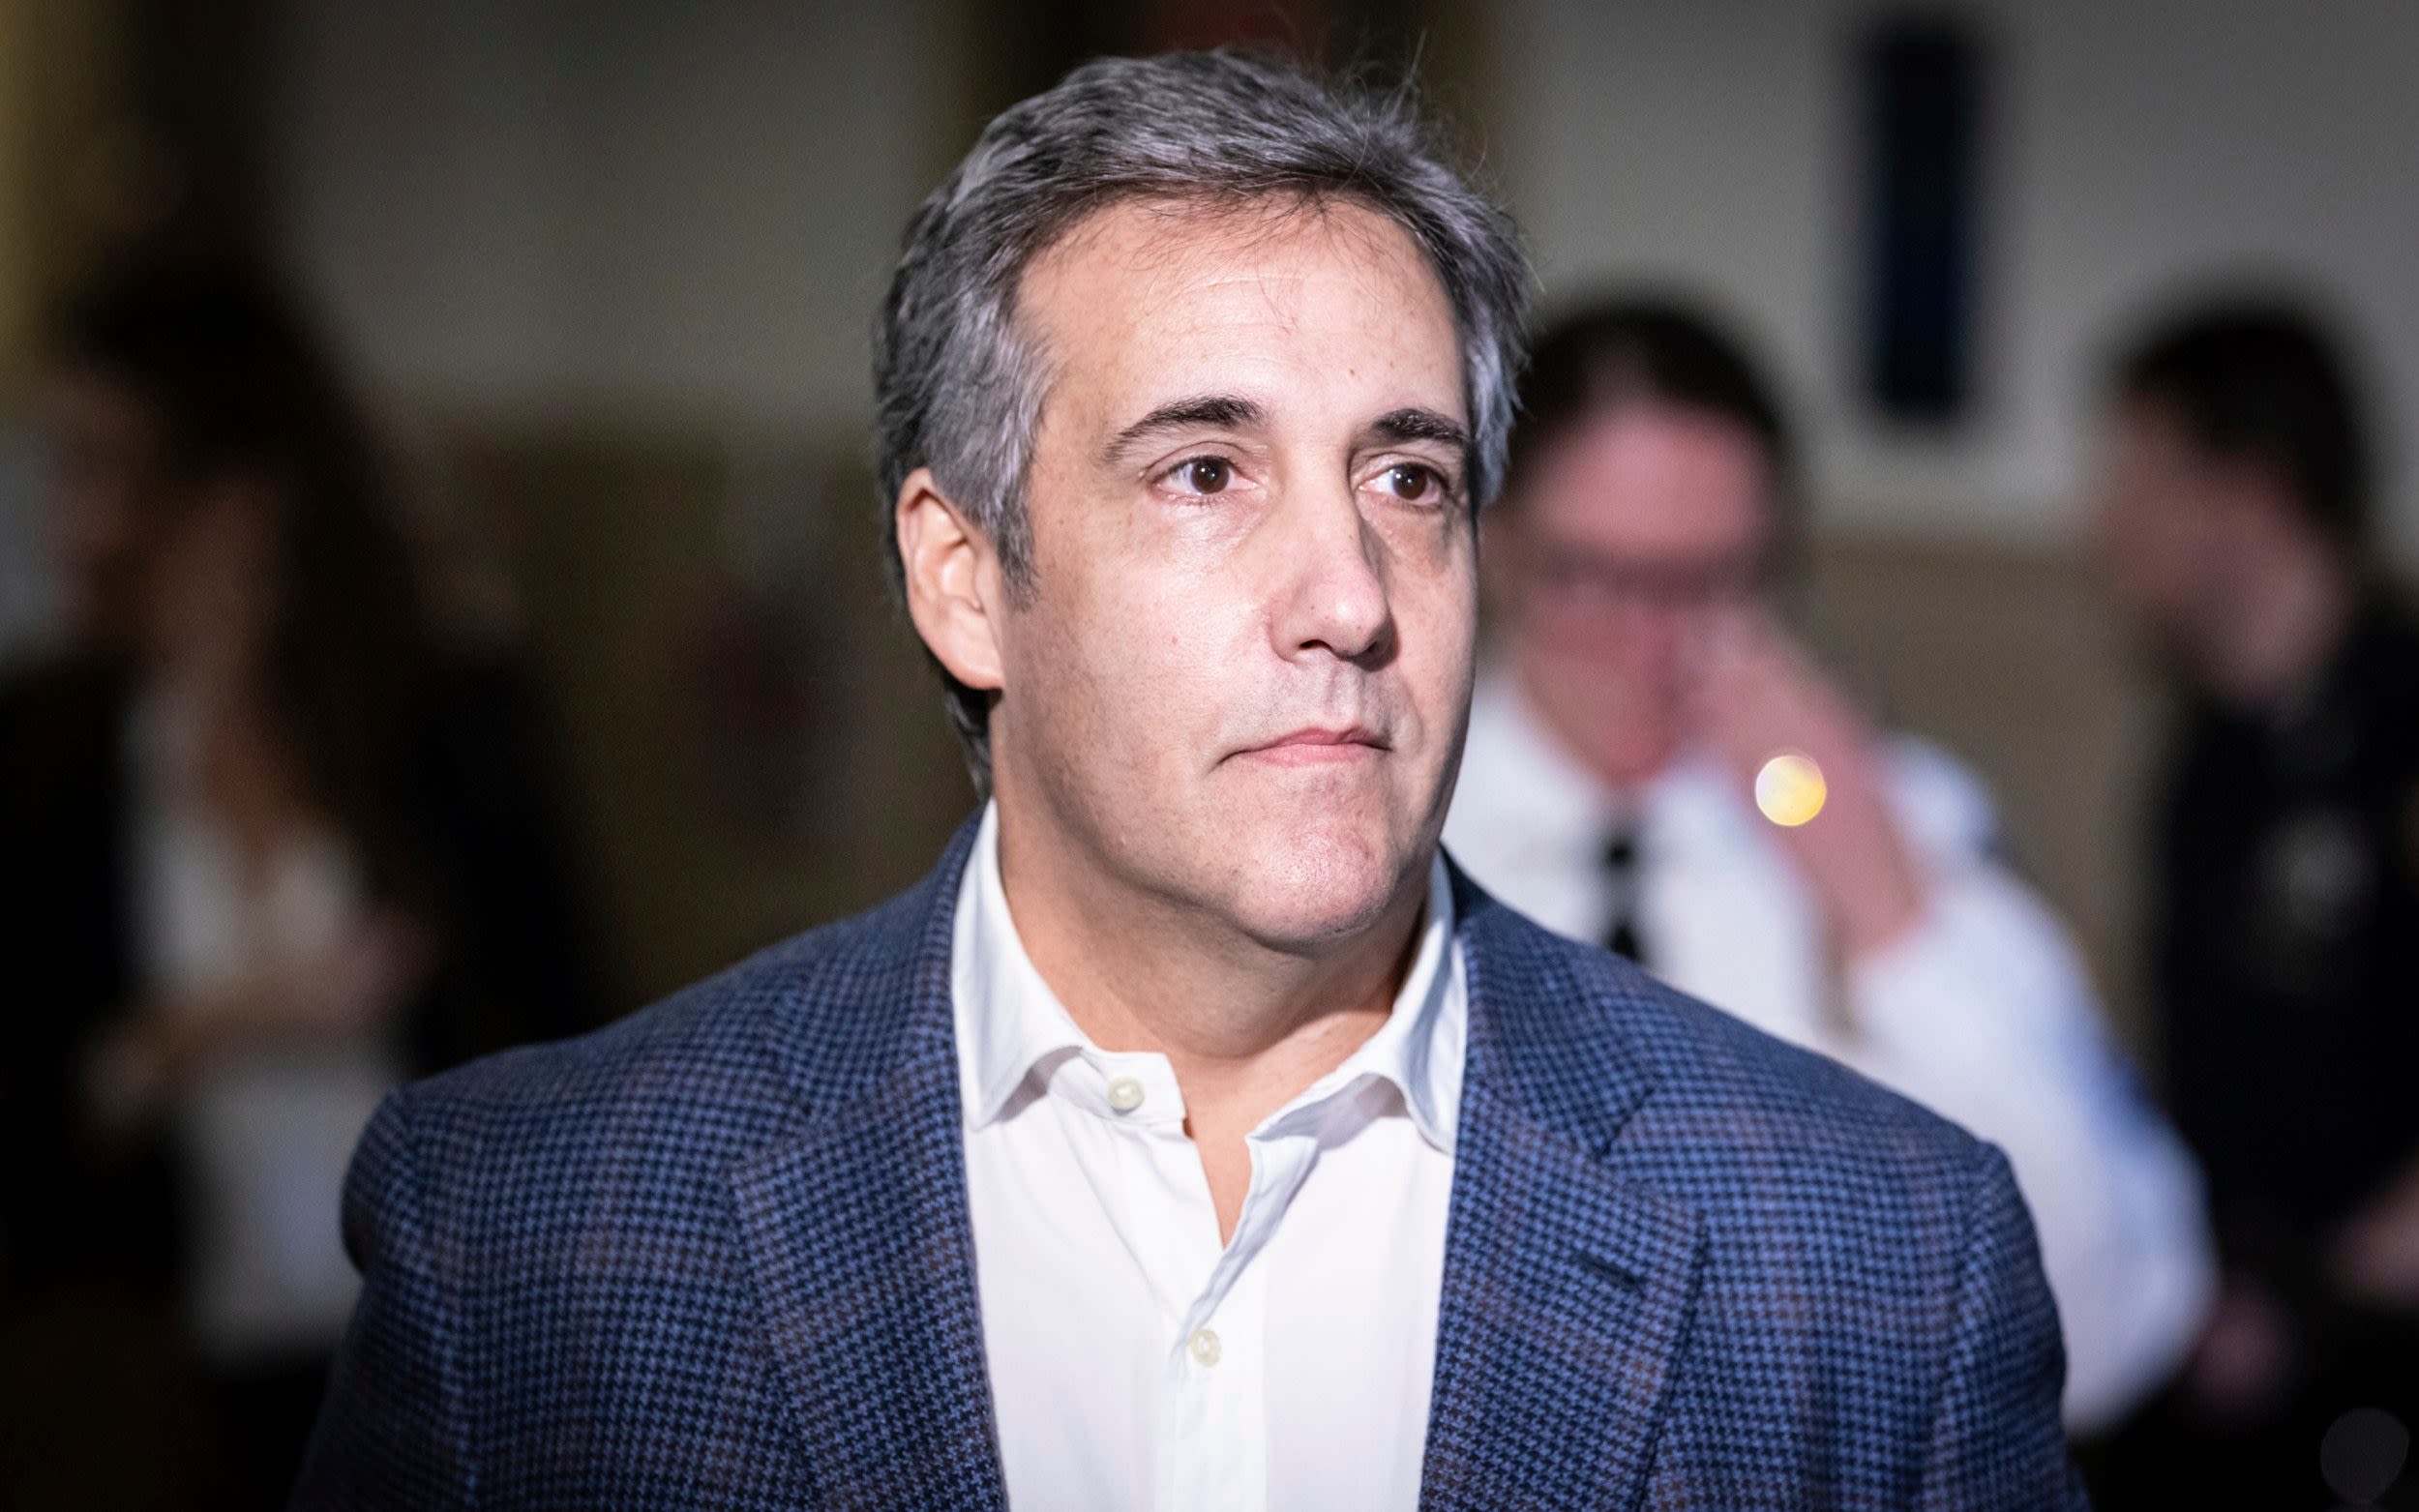 Trump ‘belongs in a f---ing cage’, says former fixer Michael Cohen